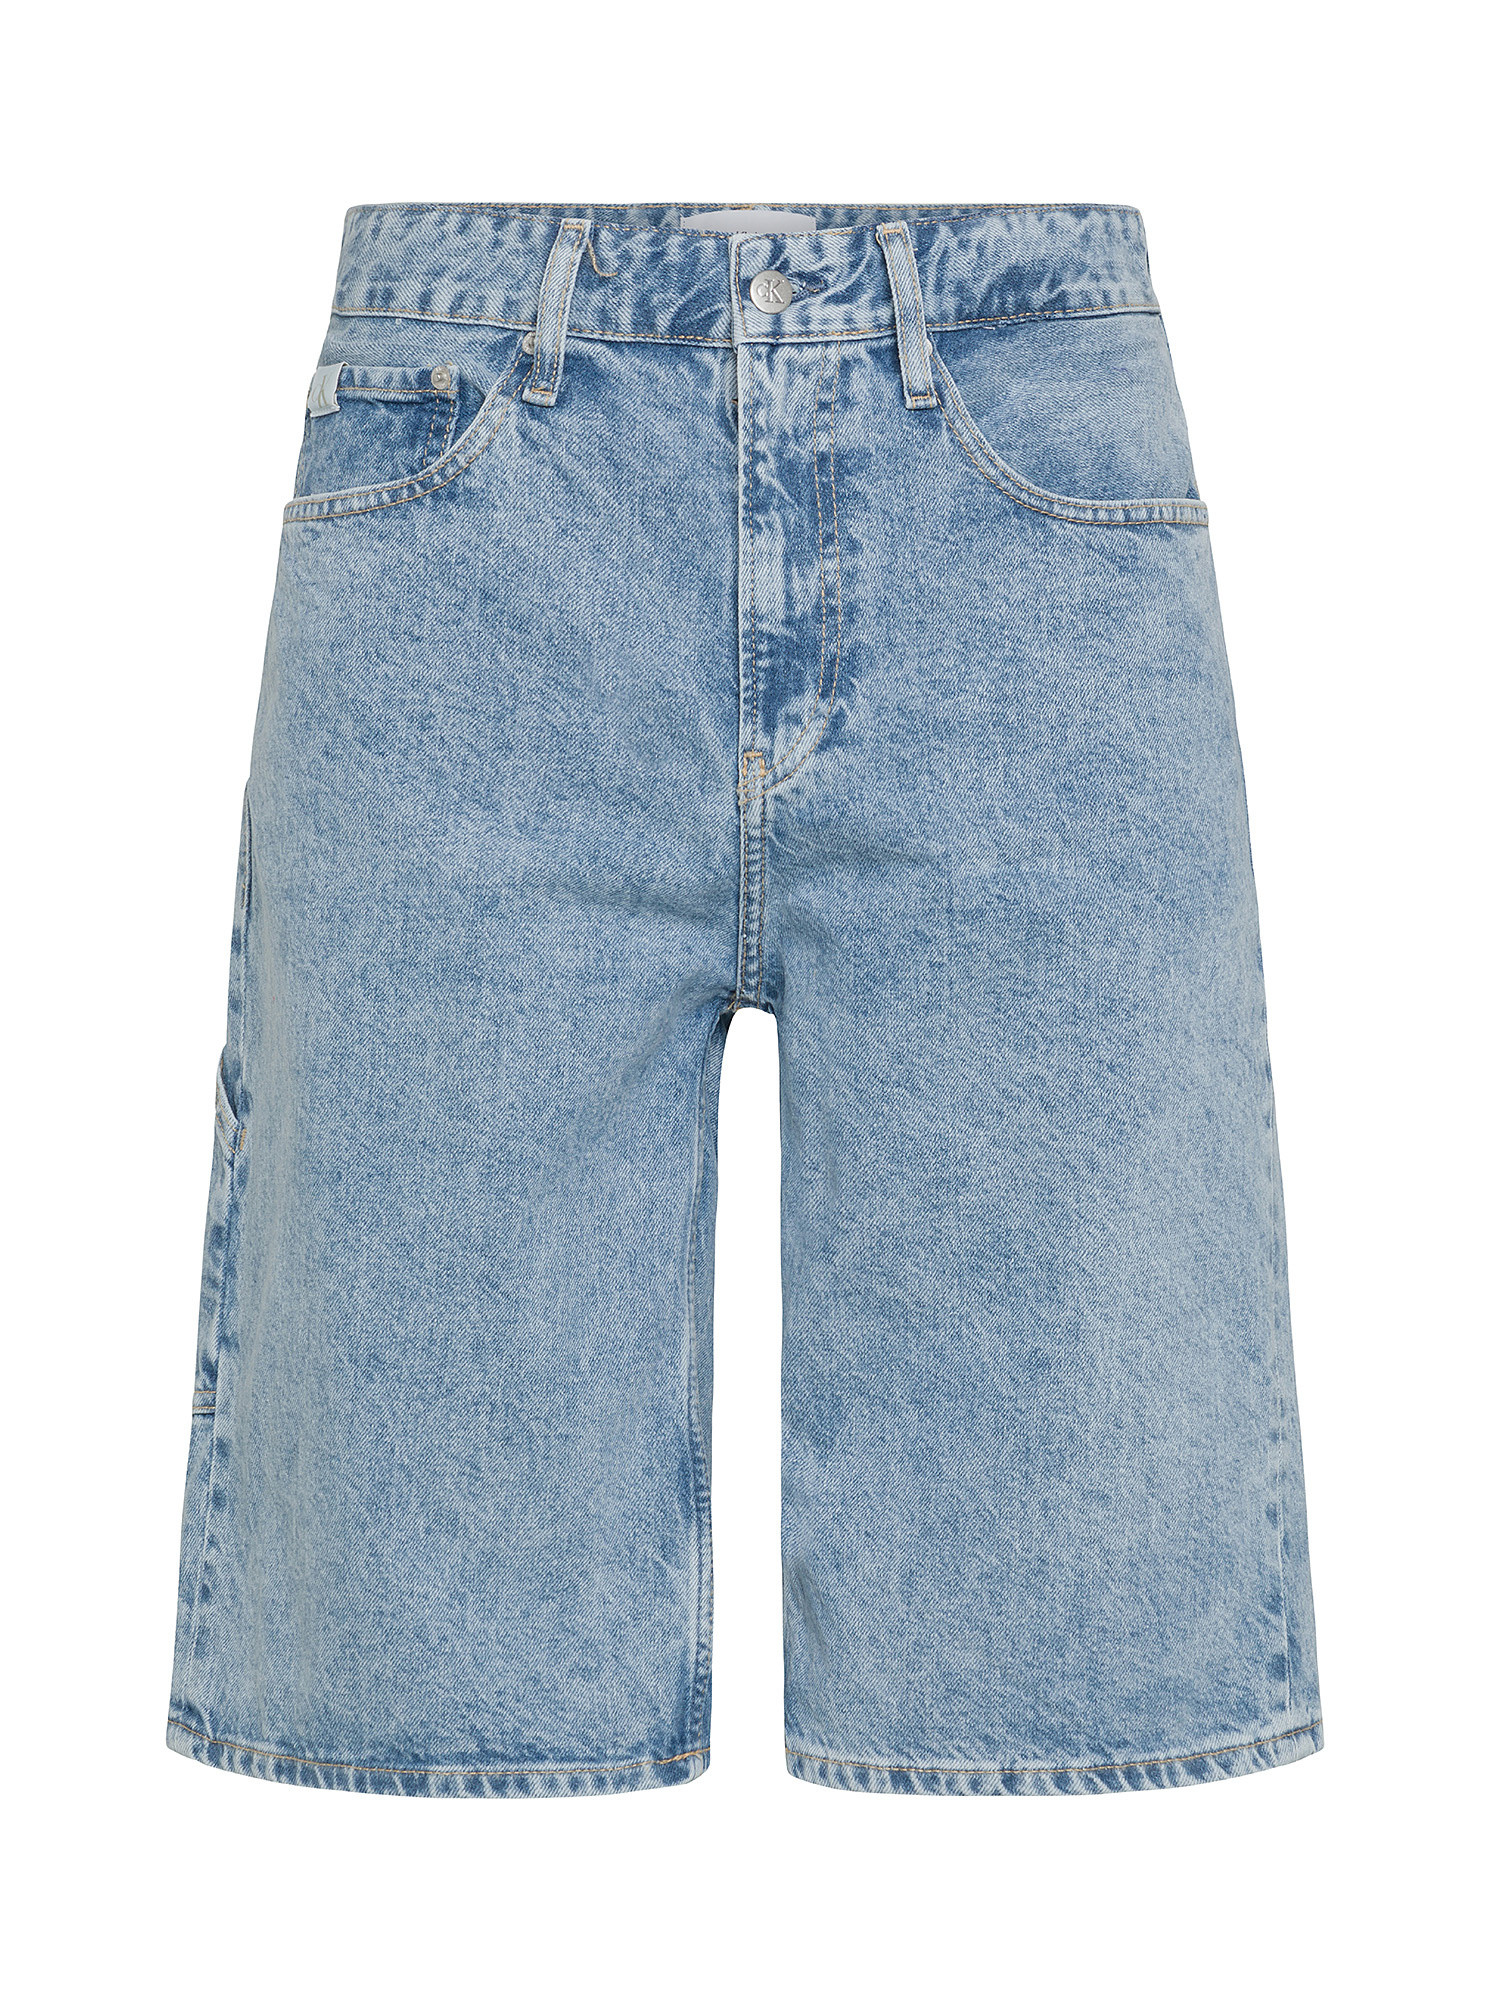 Calvin Klein Jeans -  Pantaloncini in jeans relaxed fit in cotone, Denim, large image number 0